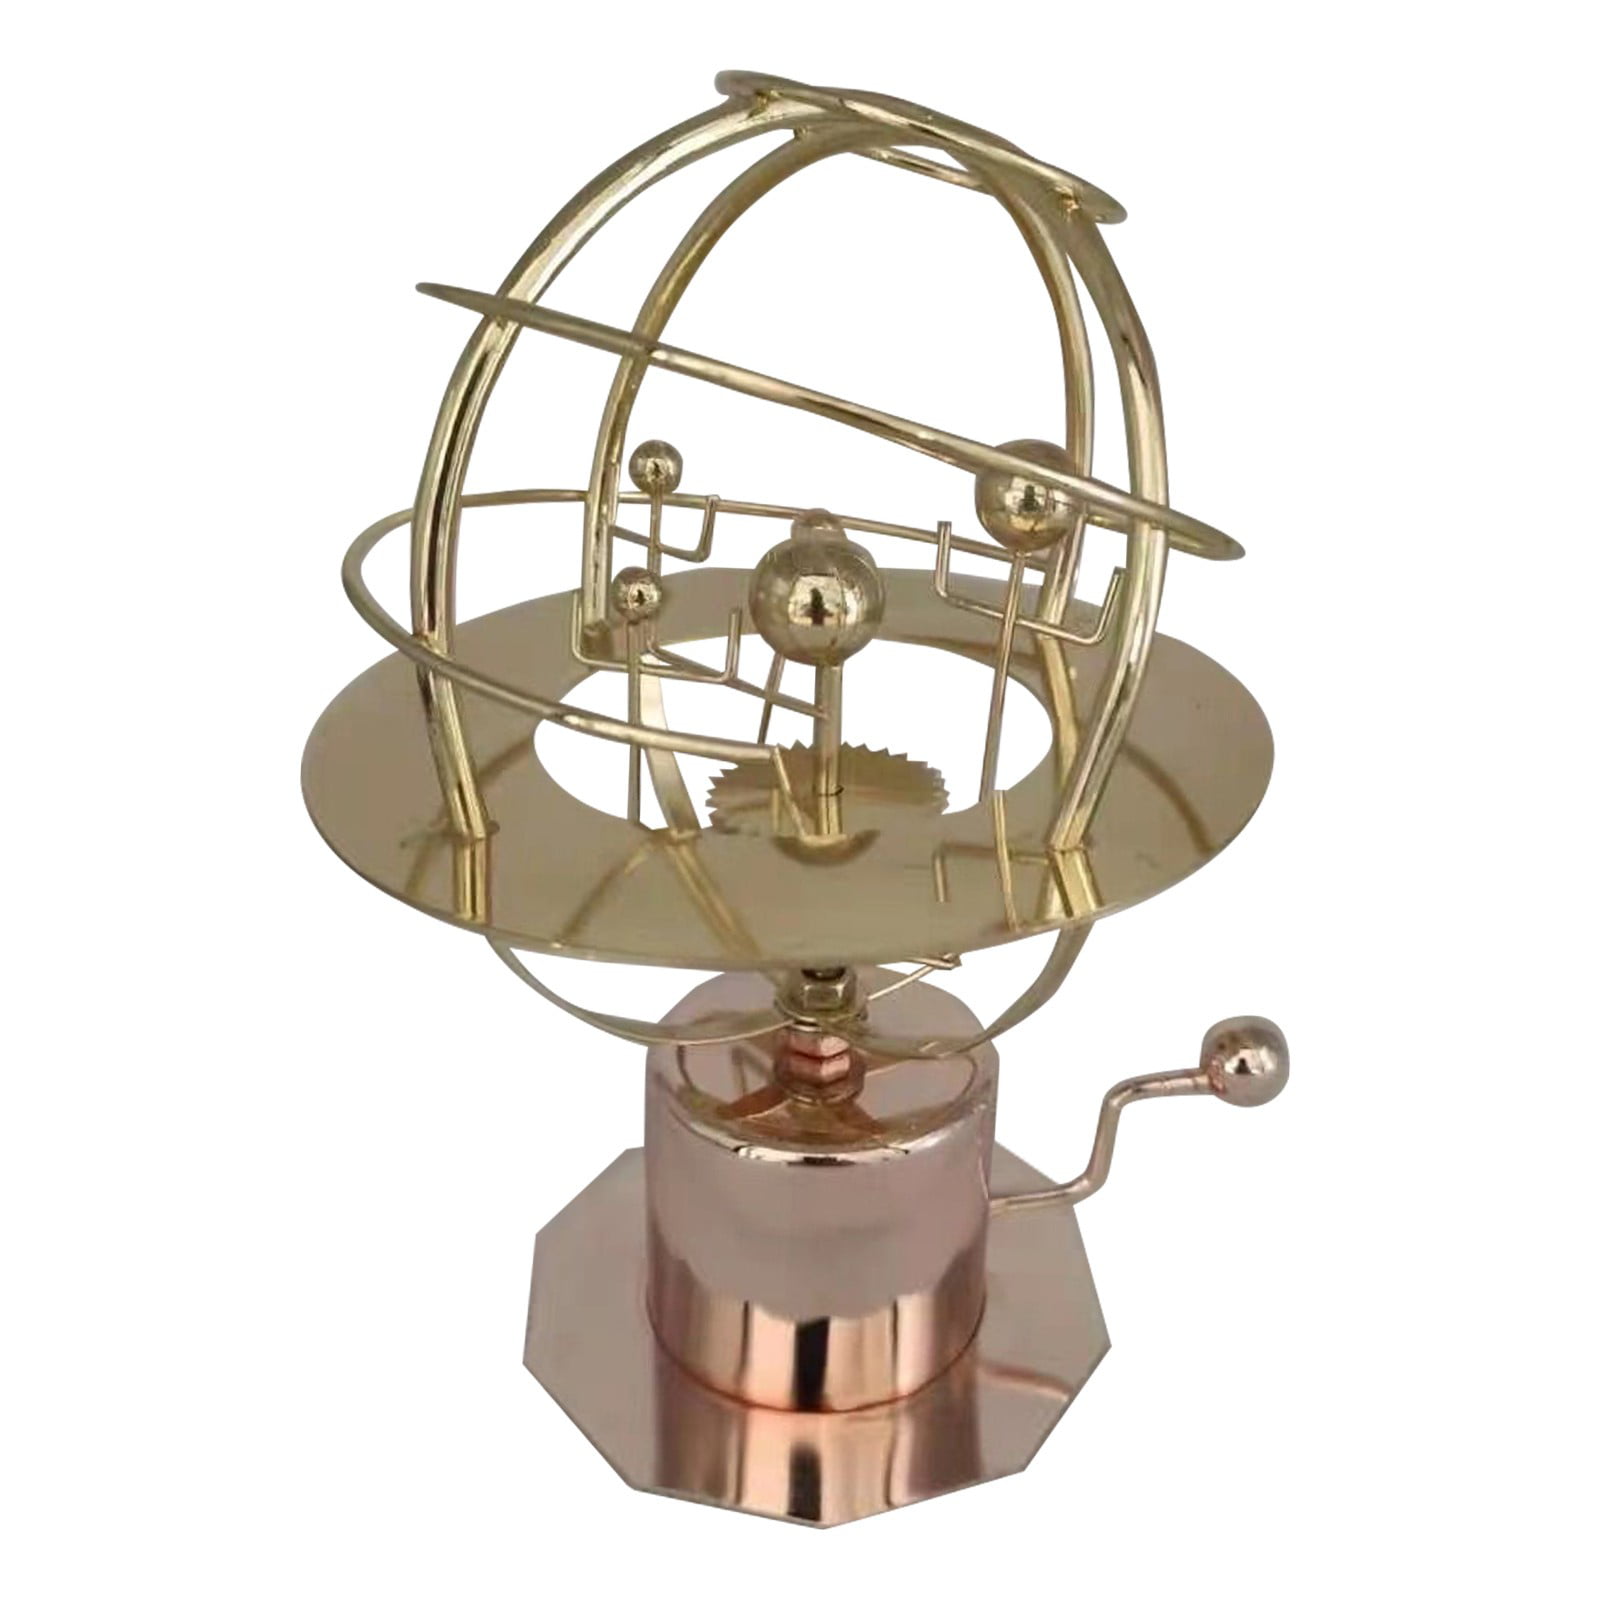 Grand Orrery Model Of The Solar System Home Living Bedroom Gifts Ornament Decor 